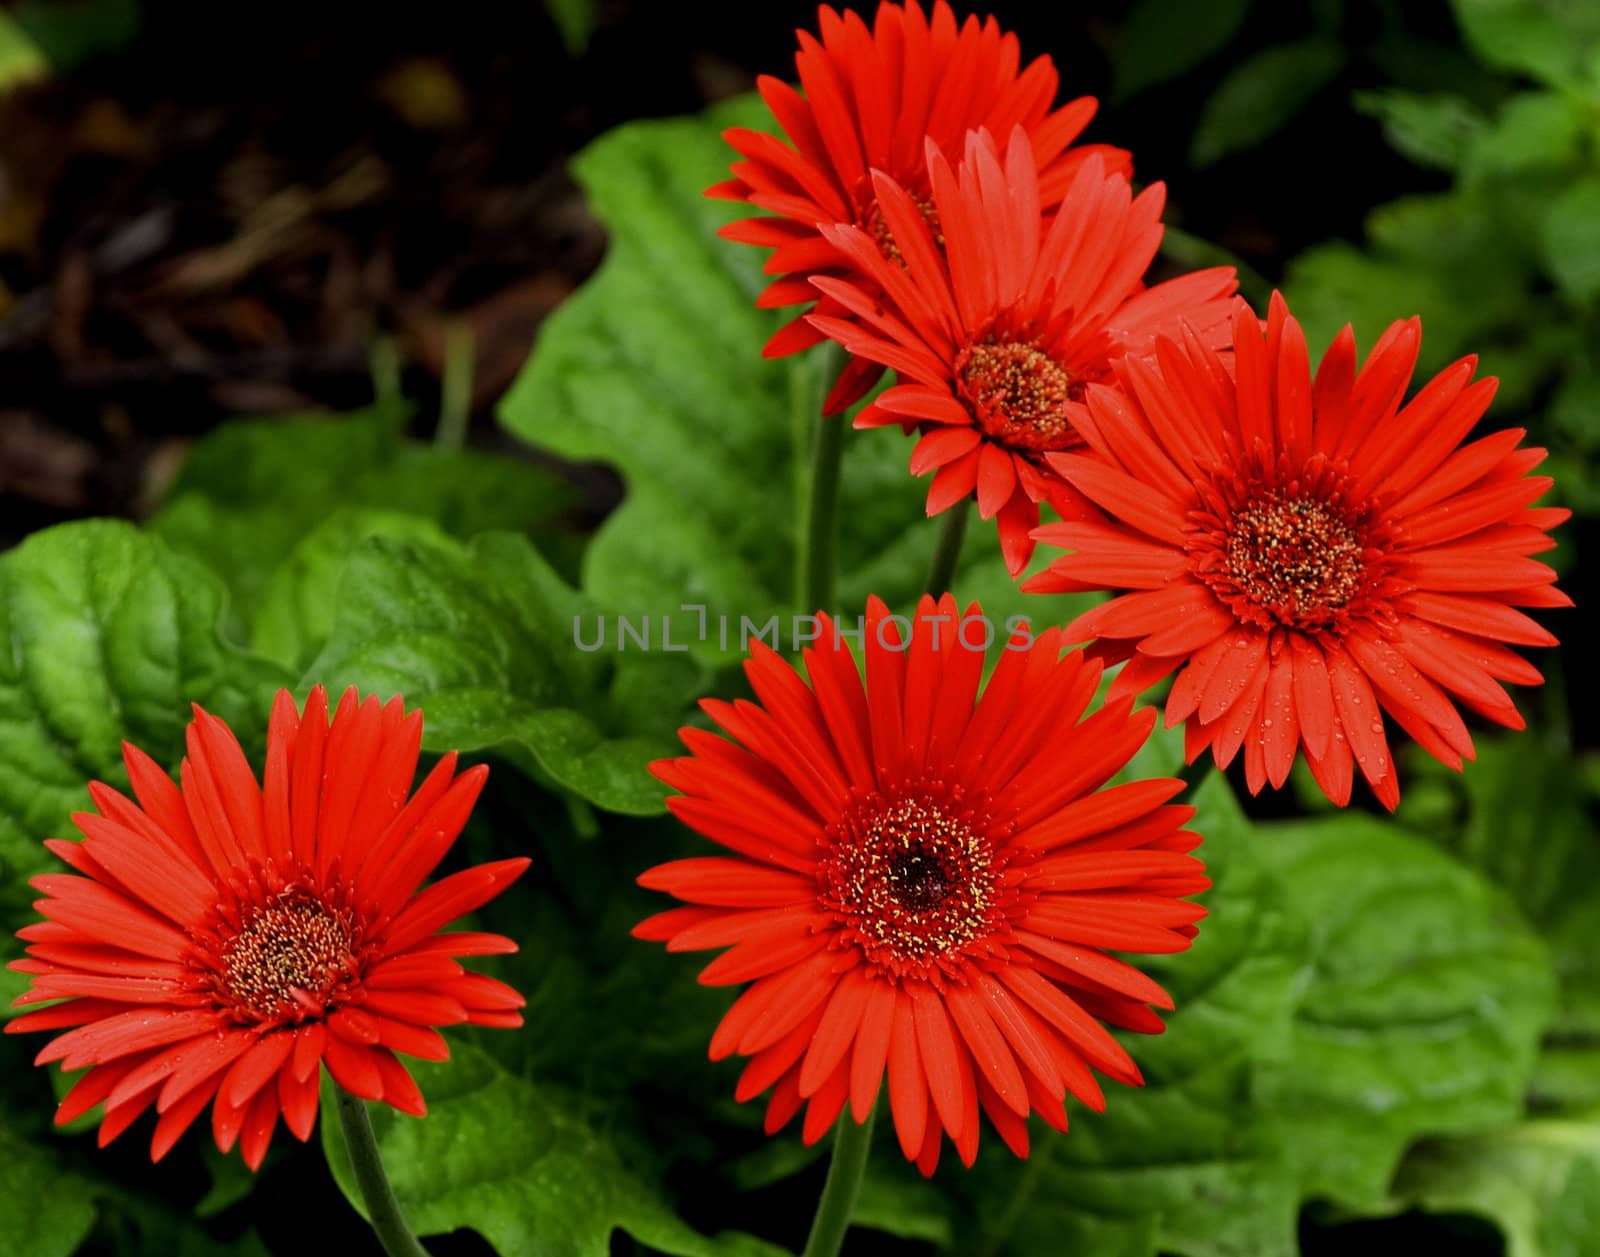 Red gerbera daisy plant with multiple blooms